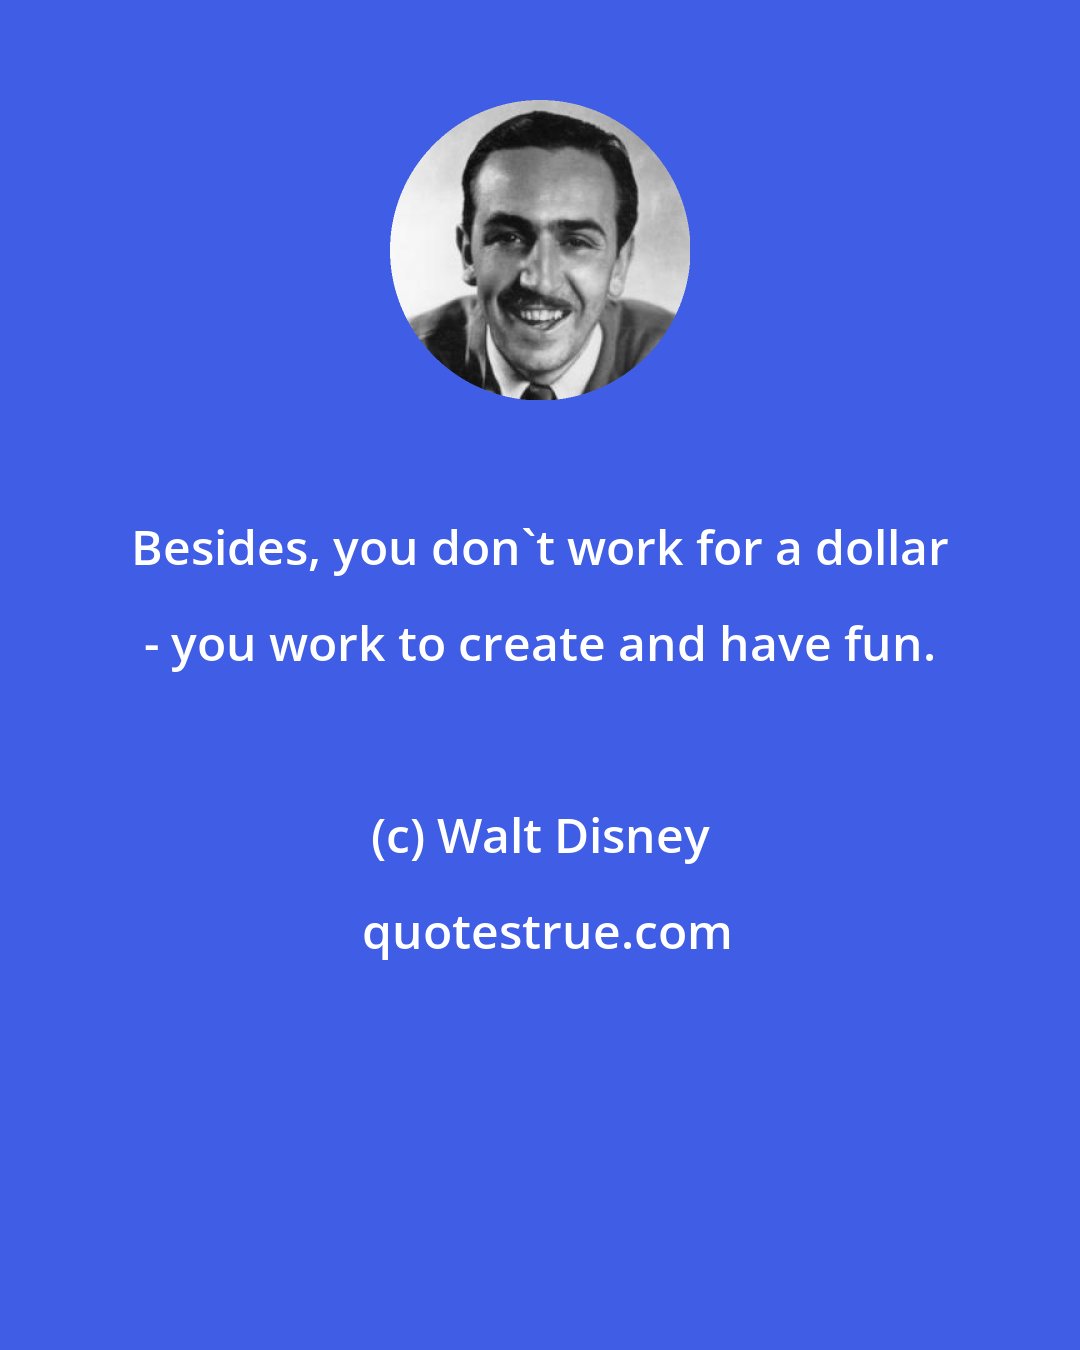 Walt Disney: Besides, you don't work for a dollar - you work to create and have fun.